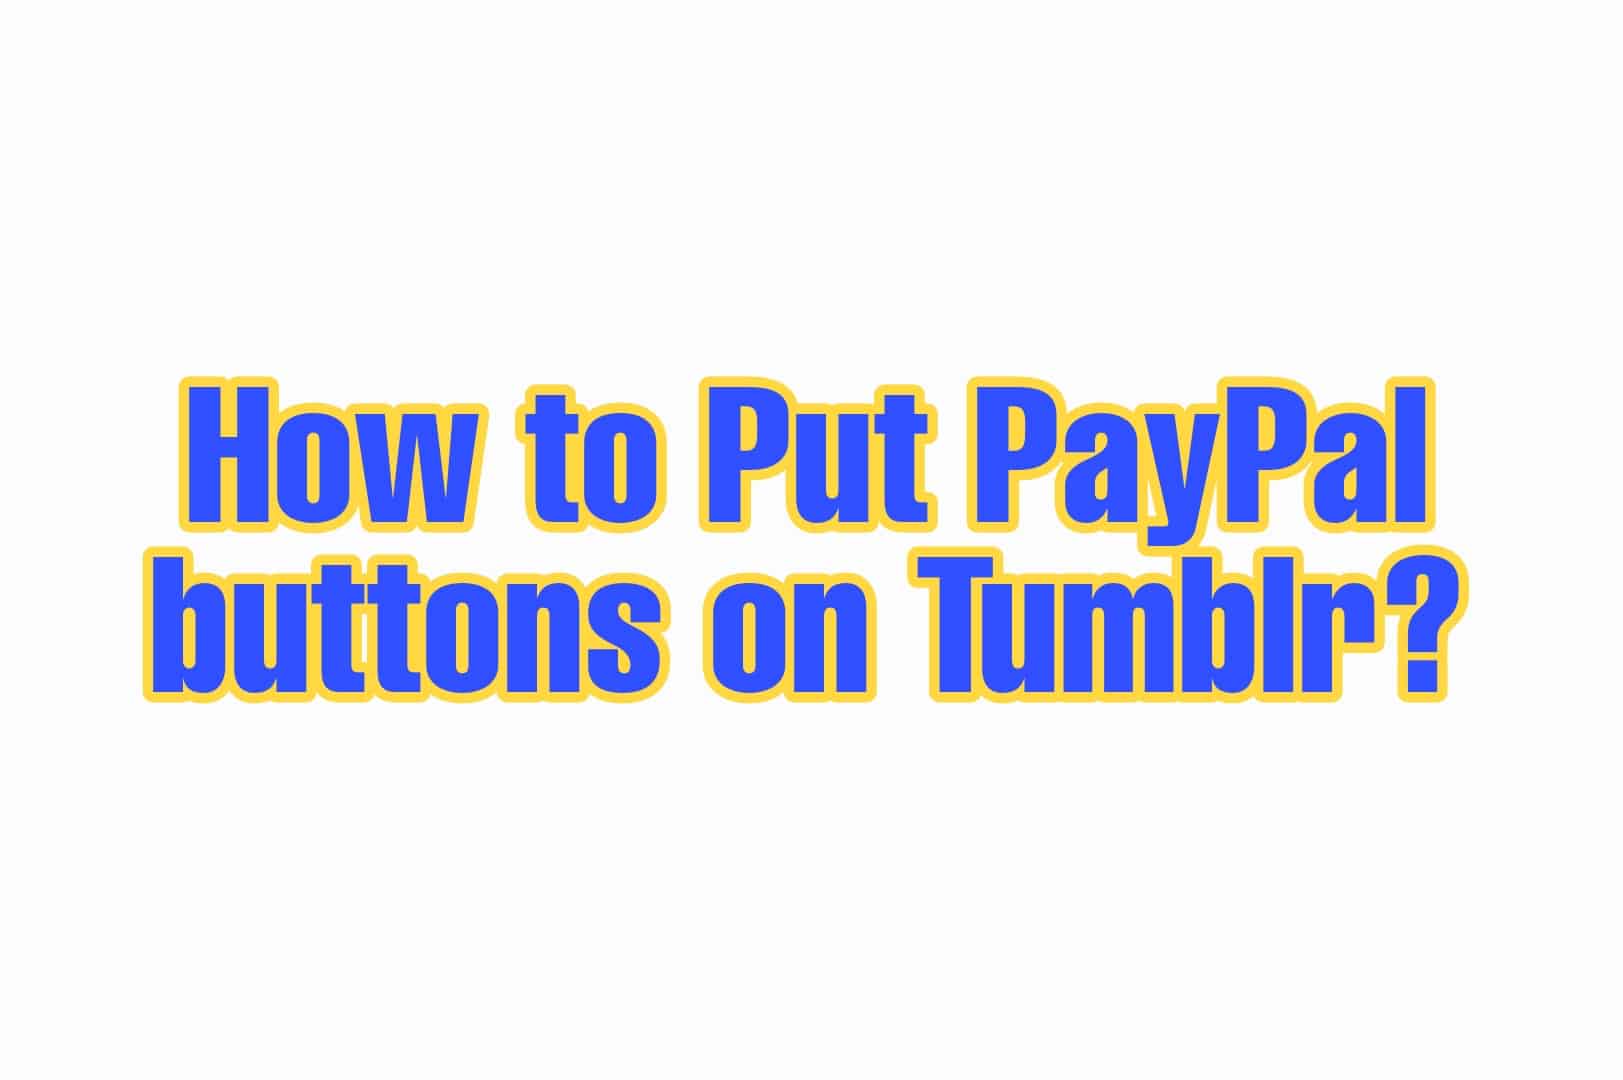 How to put a PayPal button on tumblr?